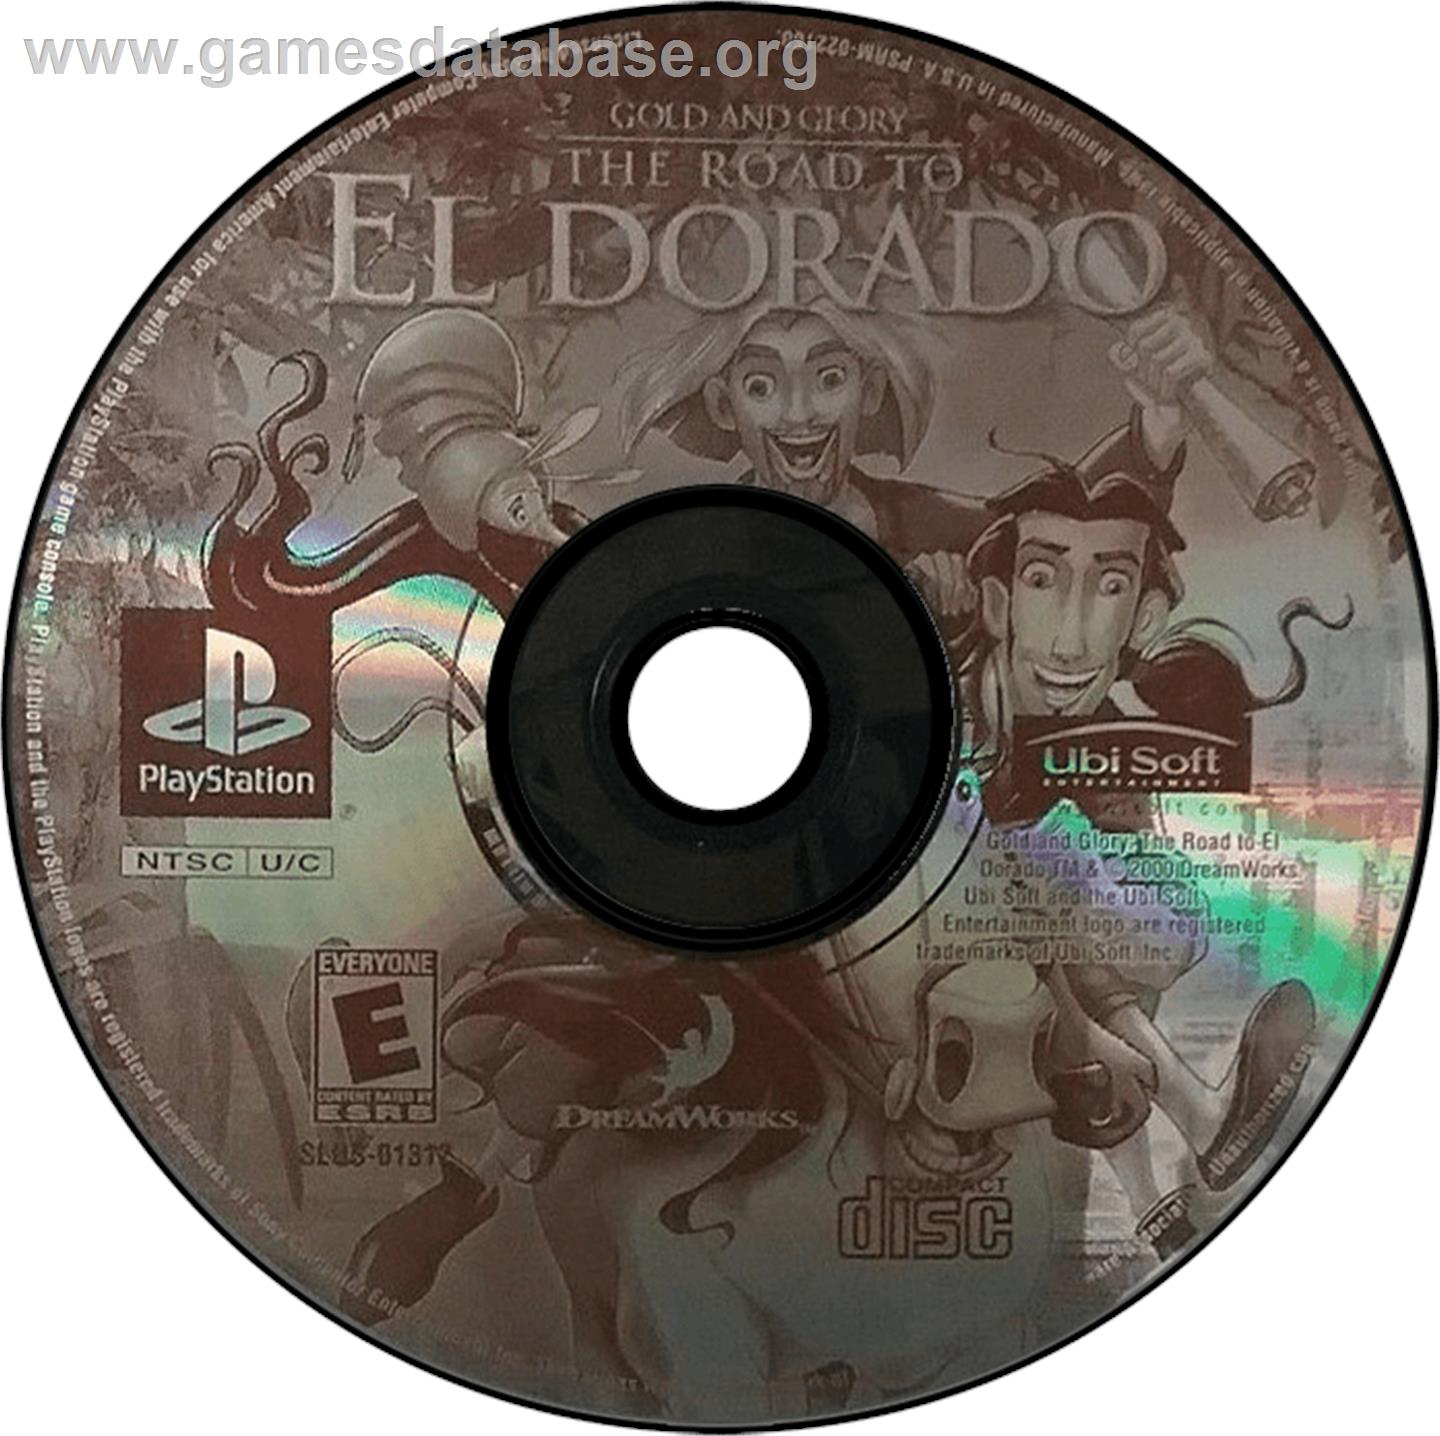 Gold and Glory: The Road to El Dorado - Sony Playstation - Artwork - Disc